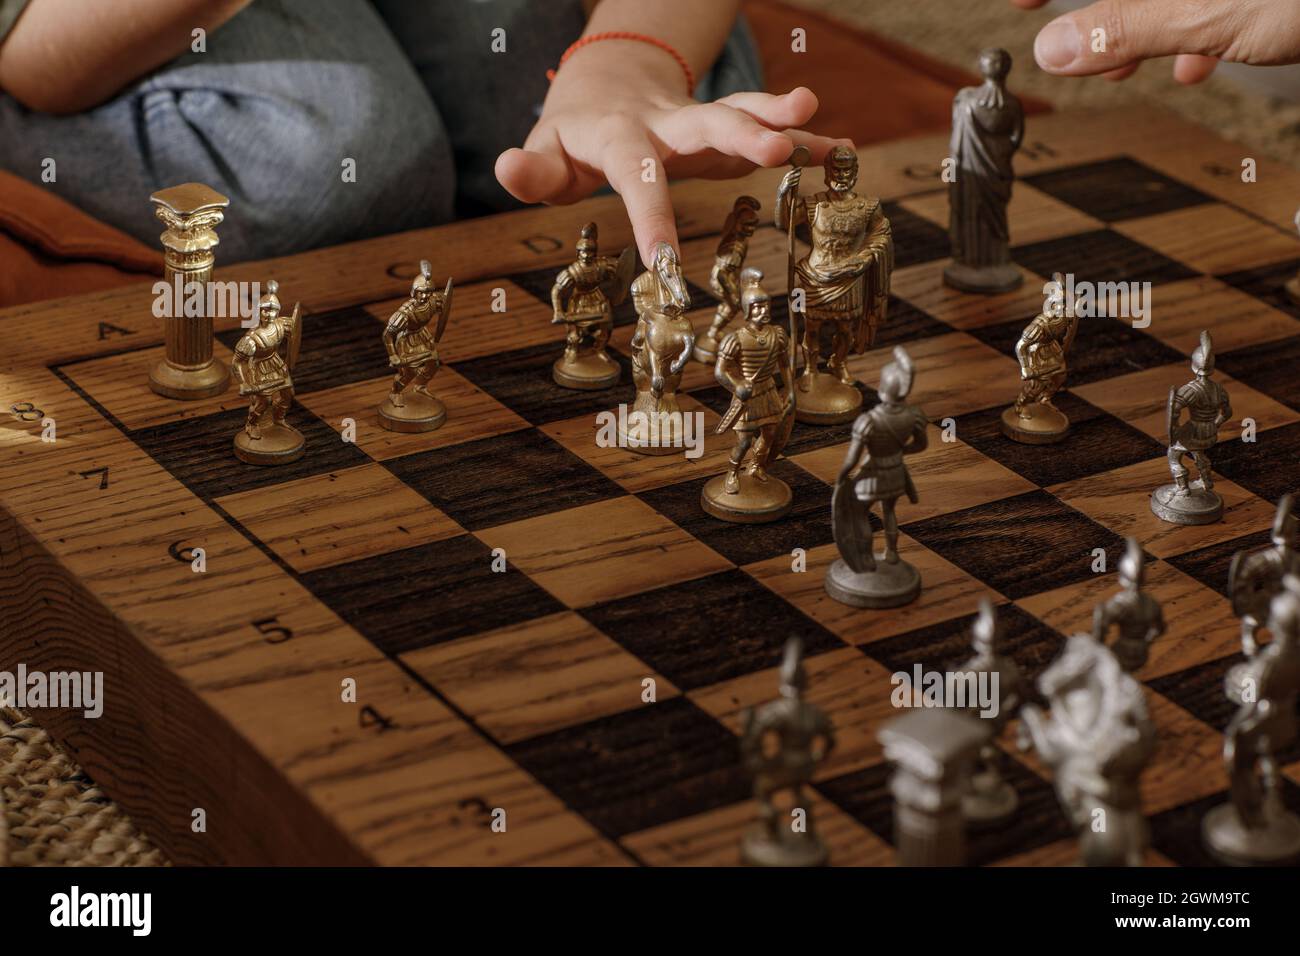 Ancient Metal Roman Chess Set With Silver And Gold Plated Pieces On Solid  Oak Wood Board. Concept Image For Business Strategy, Competition,  Relaxation Stock Photo - Alamy